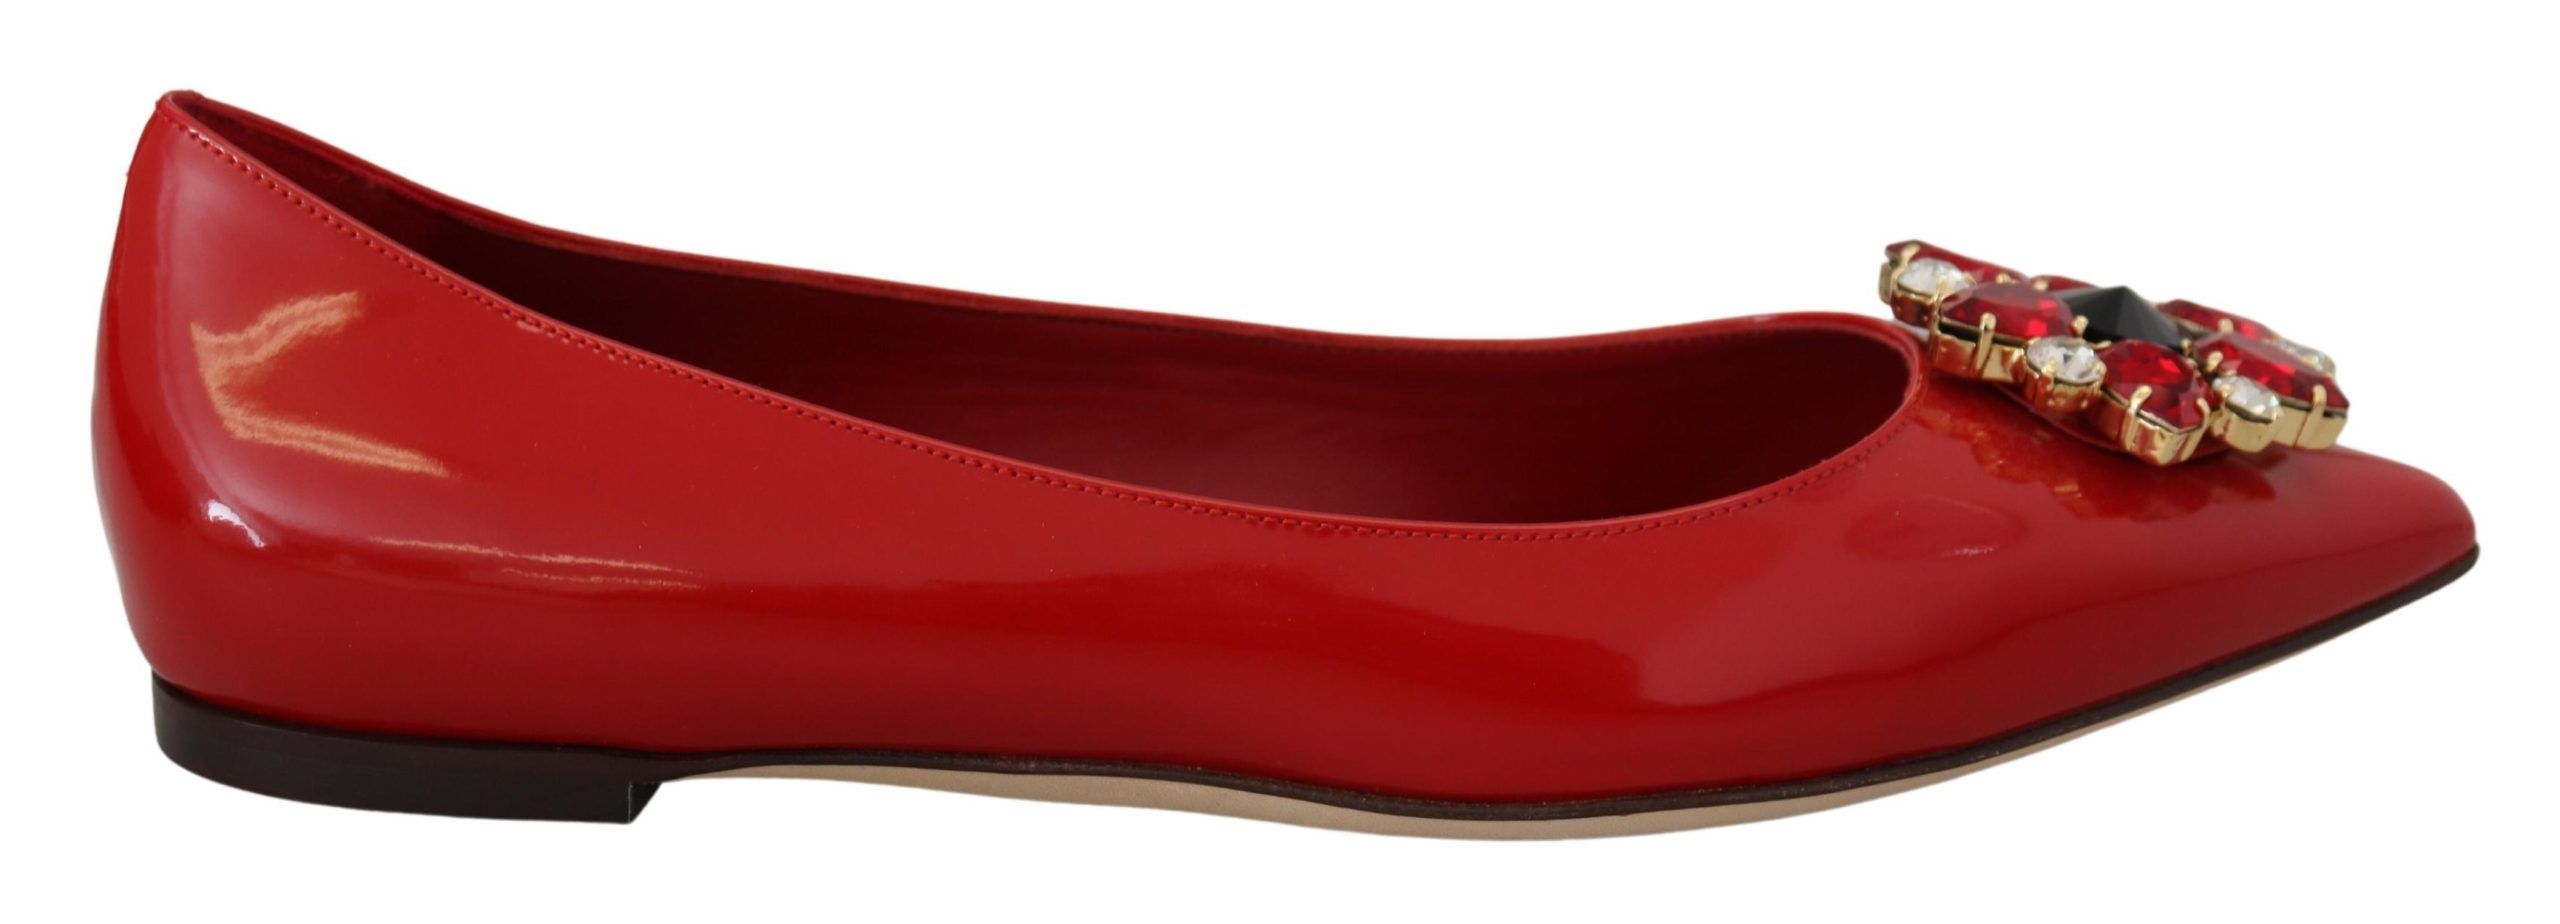 Red Dolce & Gabbana Red Suede Crystal Loafers - Exquisite Elegance EU36.5/US6